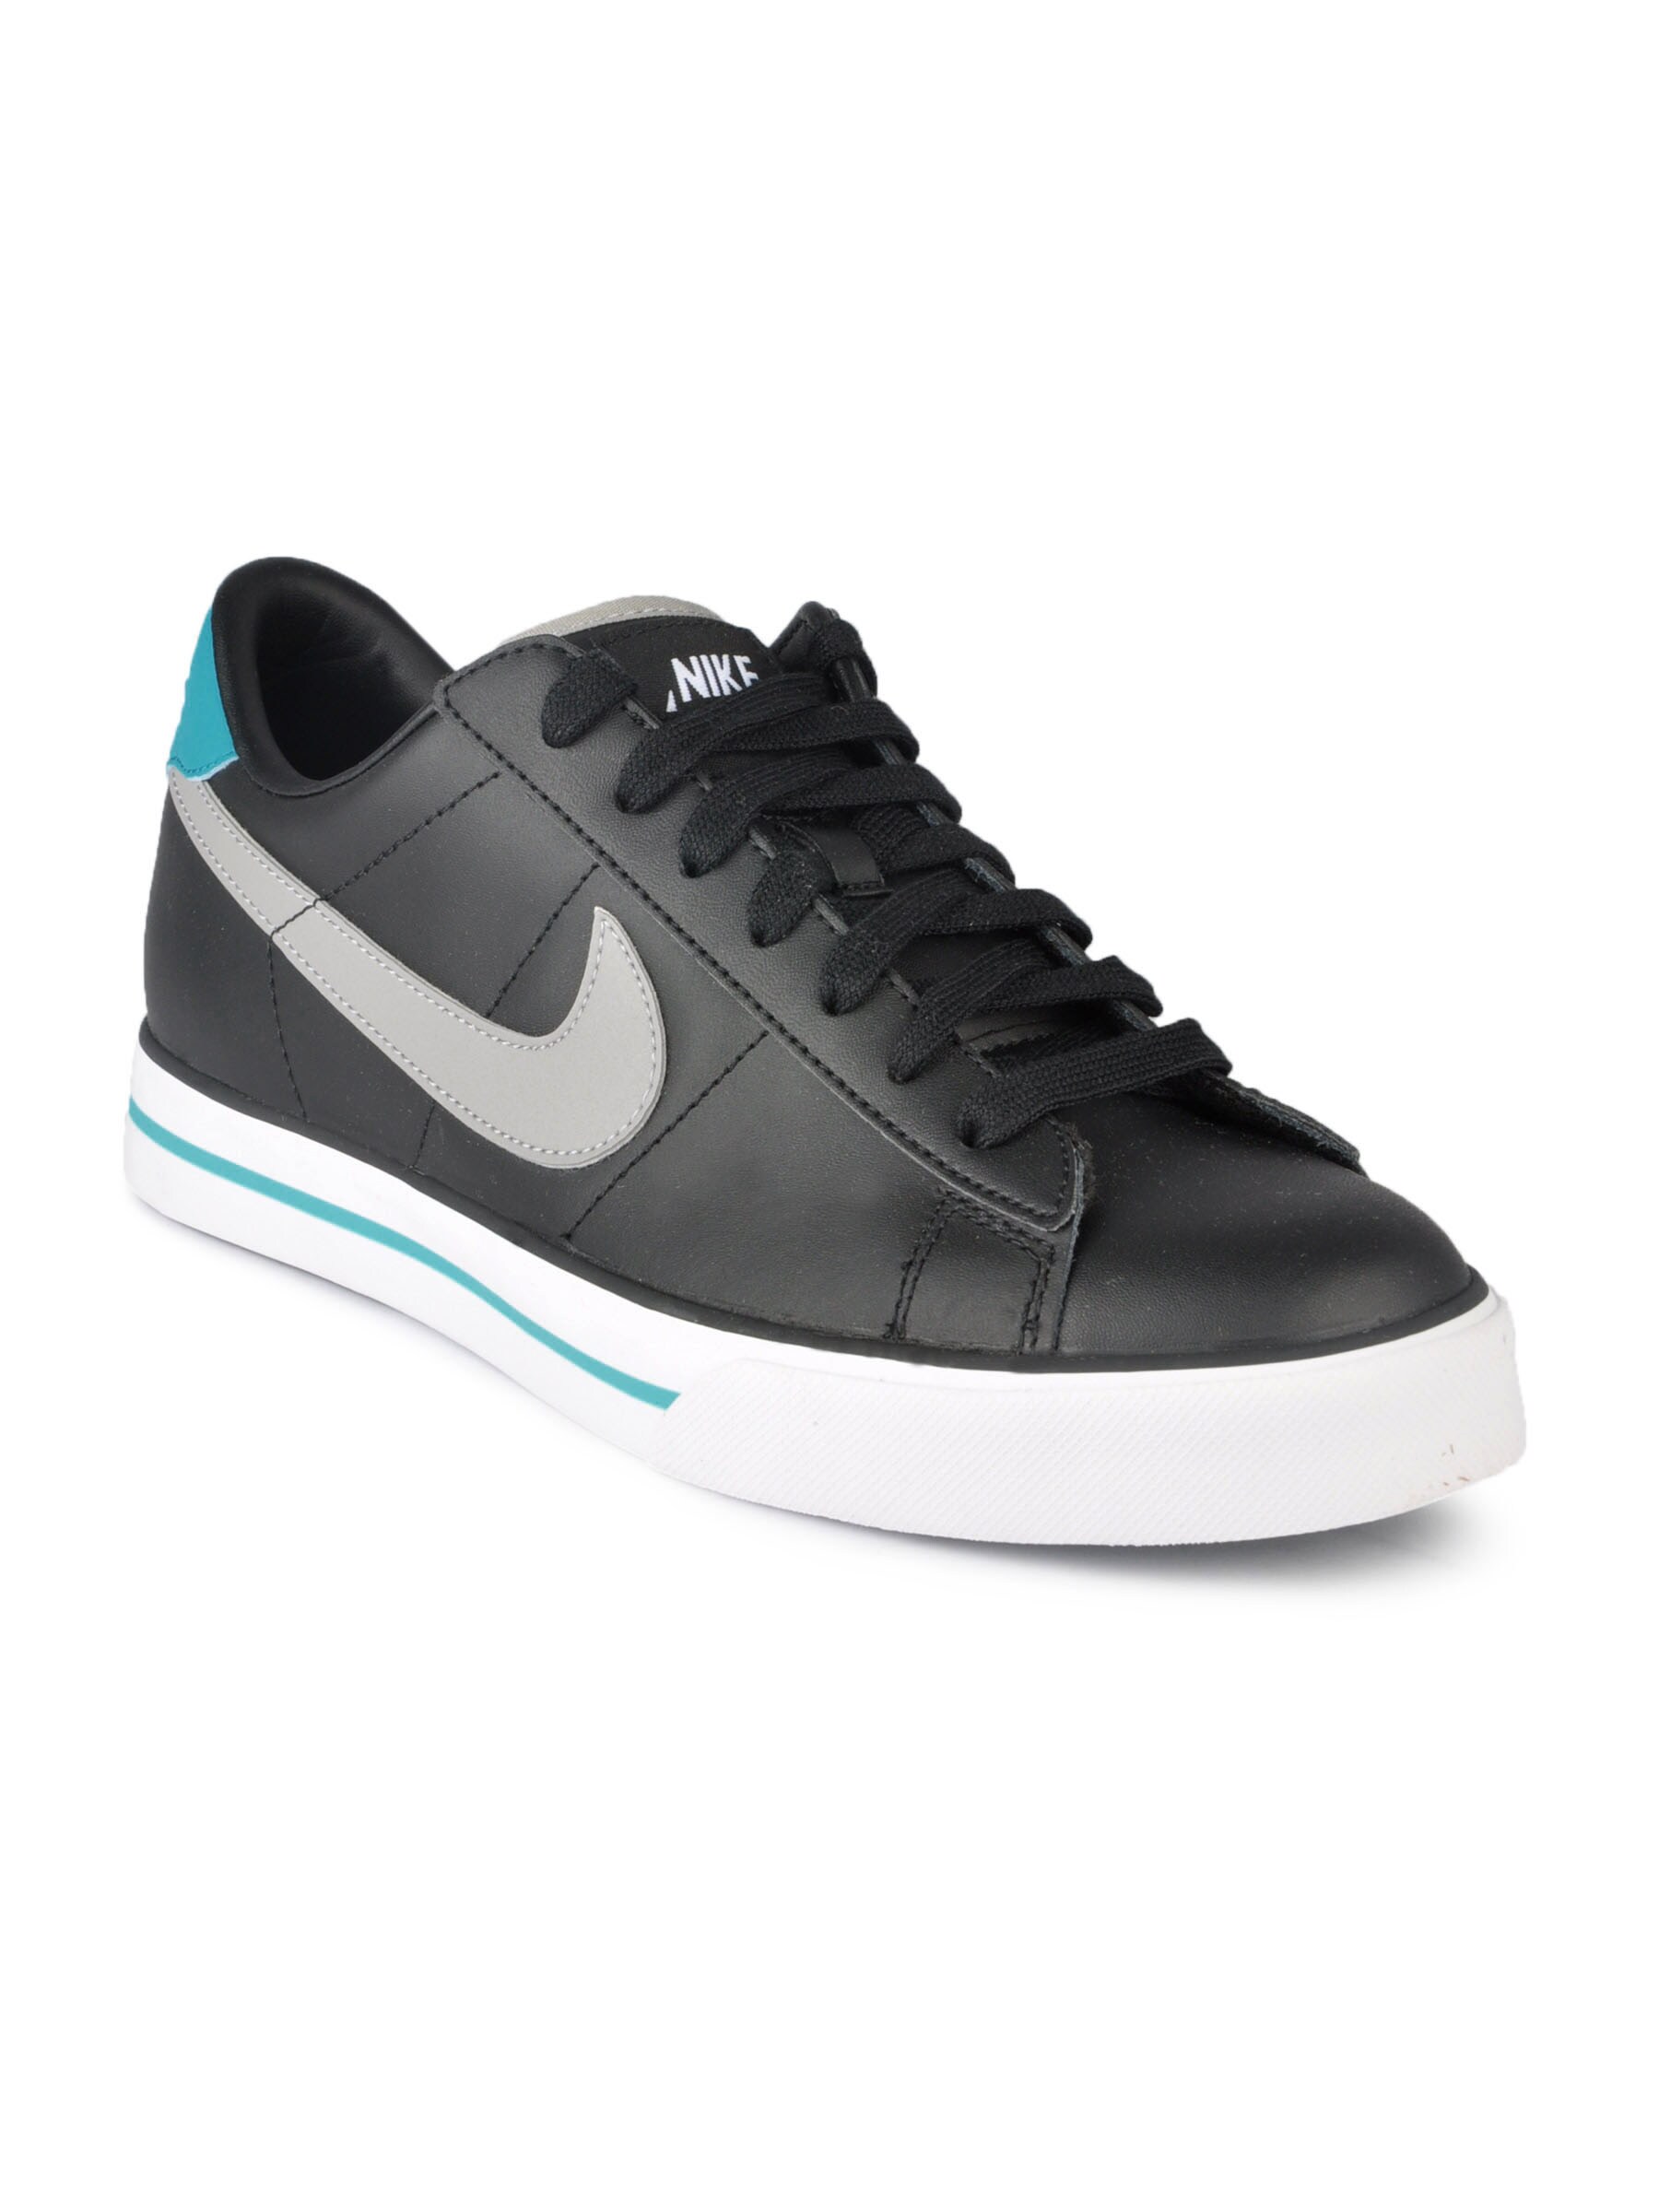 Nike Men Sweet Classic Leather Black Casual Shoes